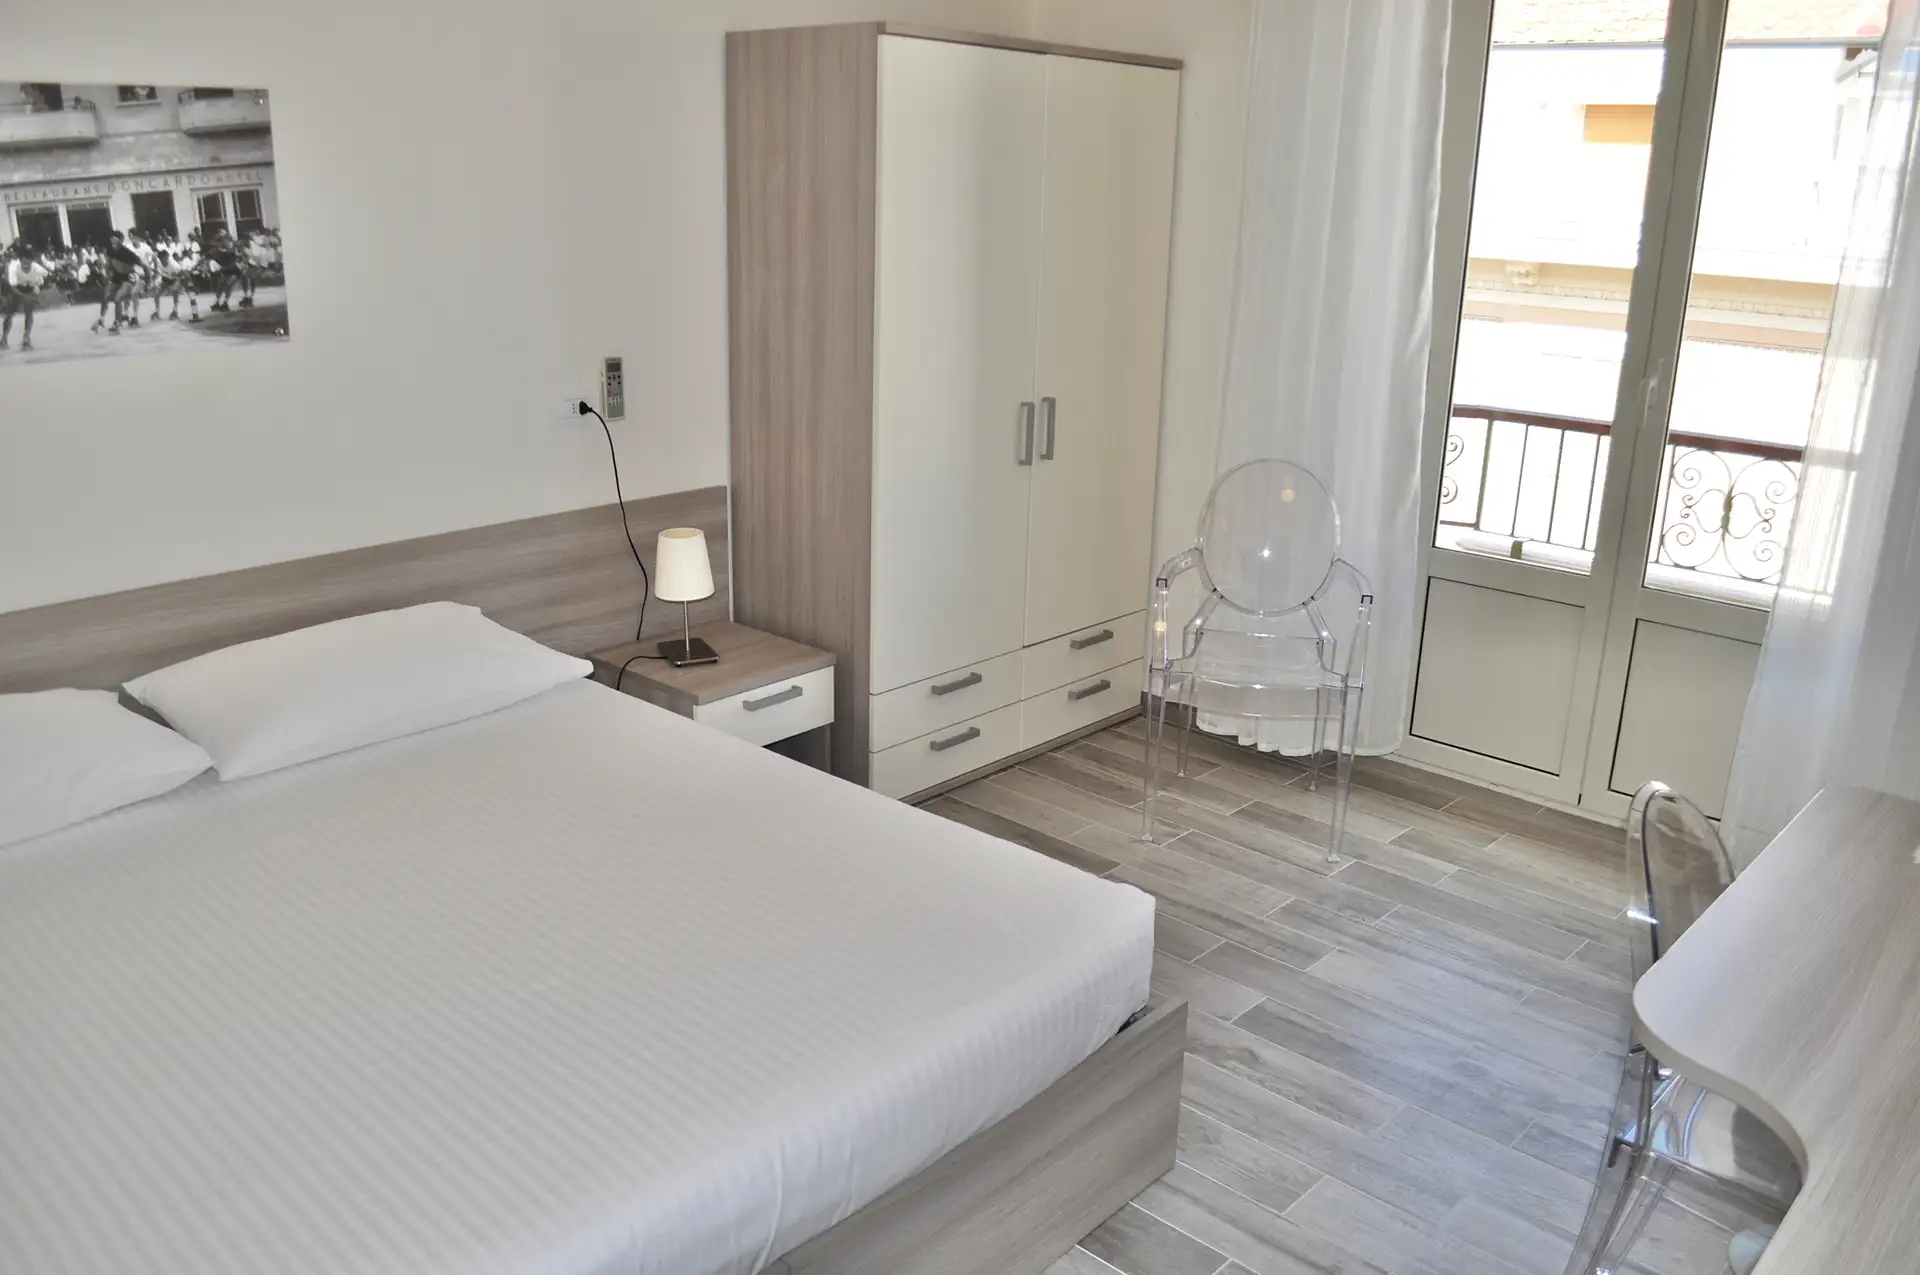 Economy double room with a street side balcony